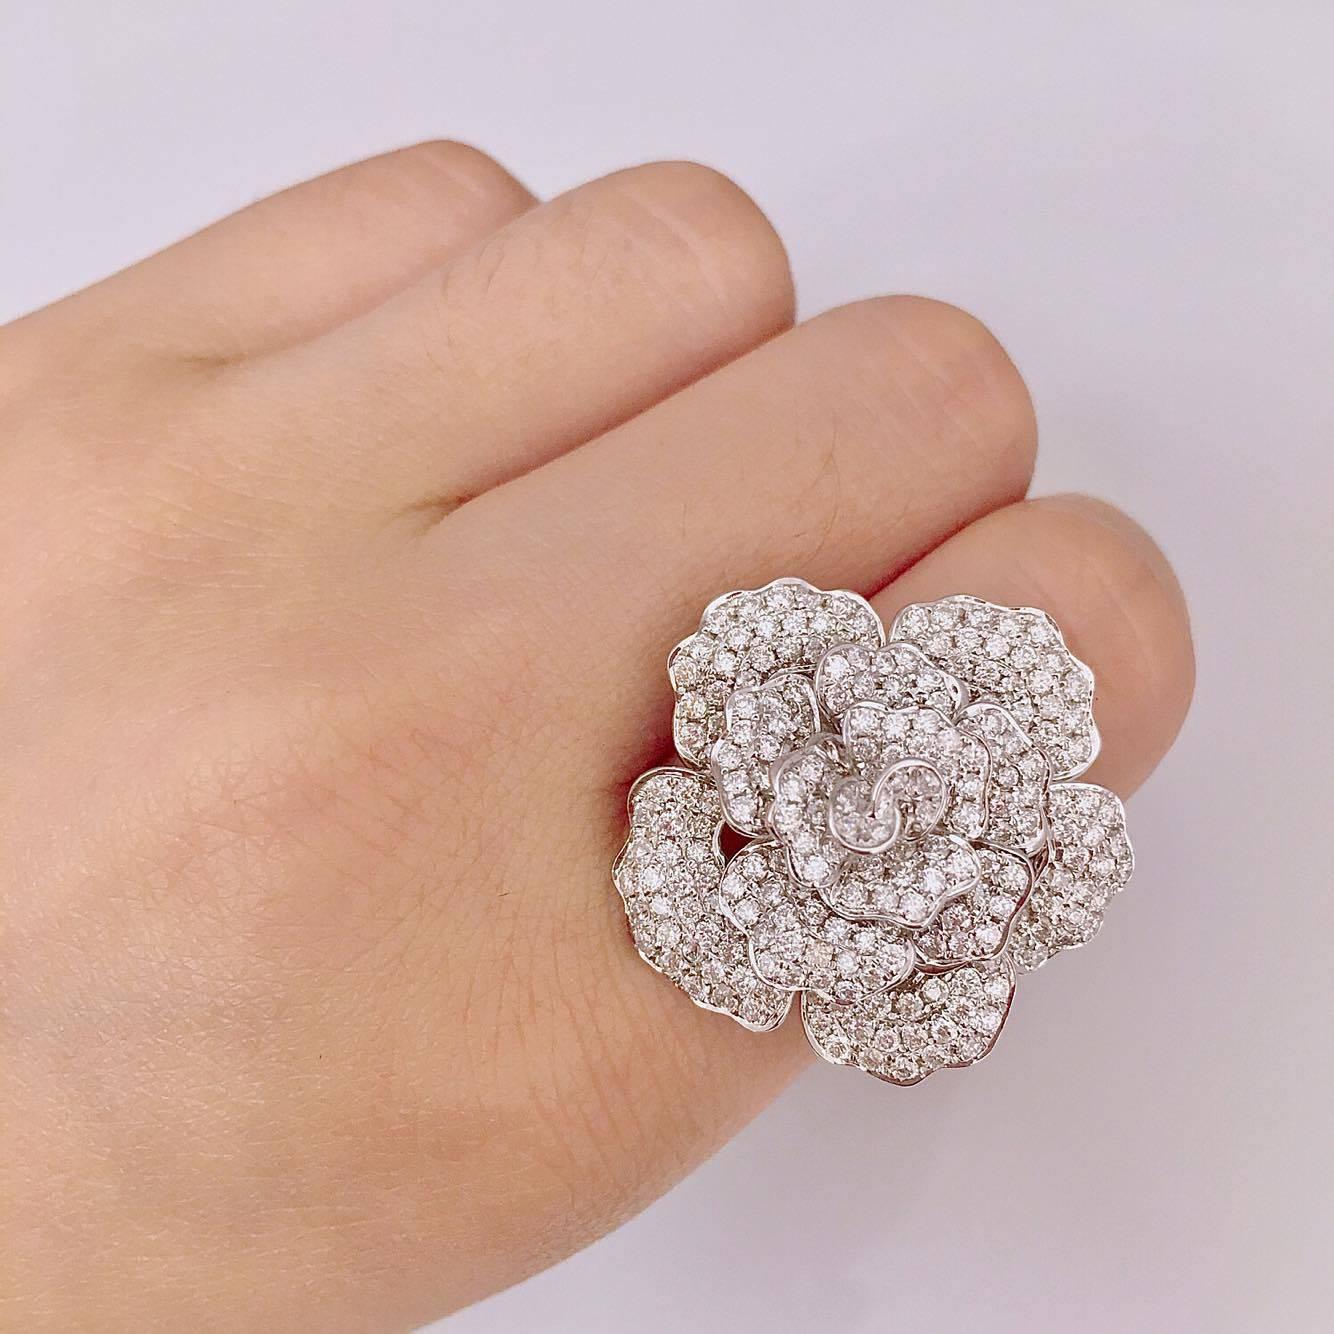 This Ring was designed and manufactured by Emilio! 243 diamonds are carefully hand set with a microscope by our skilled craftsman. 
Color: D-E
Clarity: VVS1
Cut: Excellent 

Sizes 4-12 Available

If you would like to see a video of this lovely piece